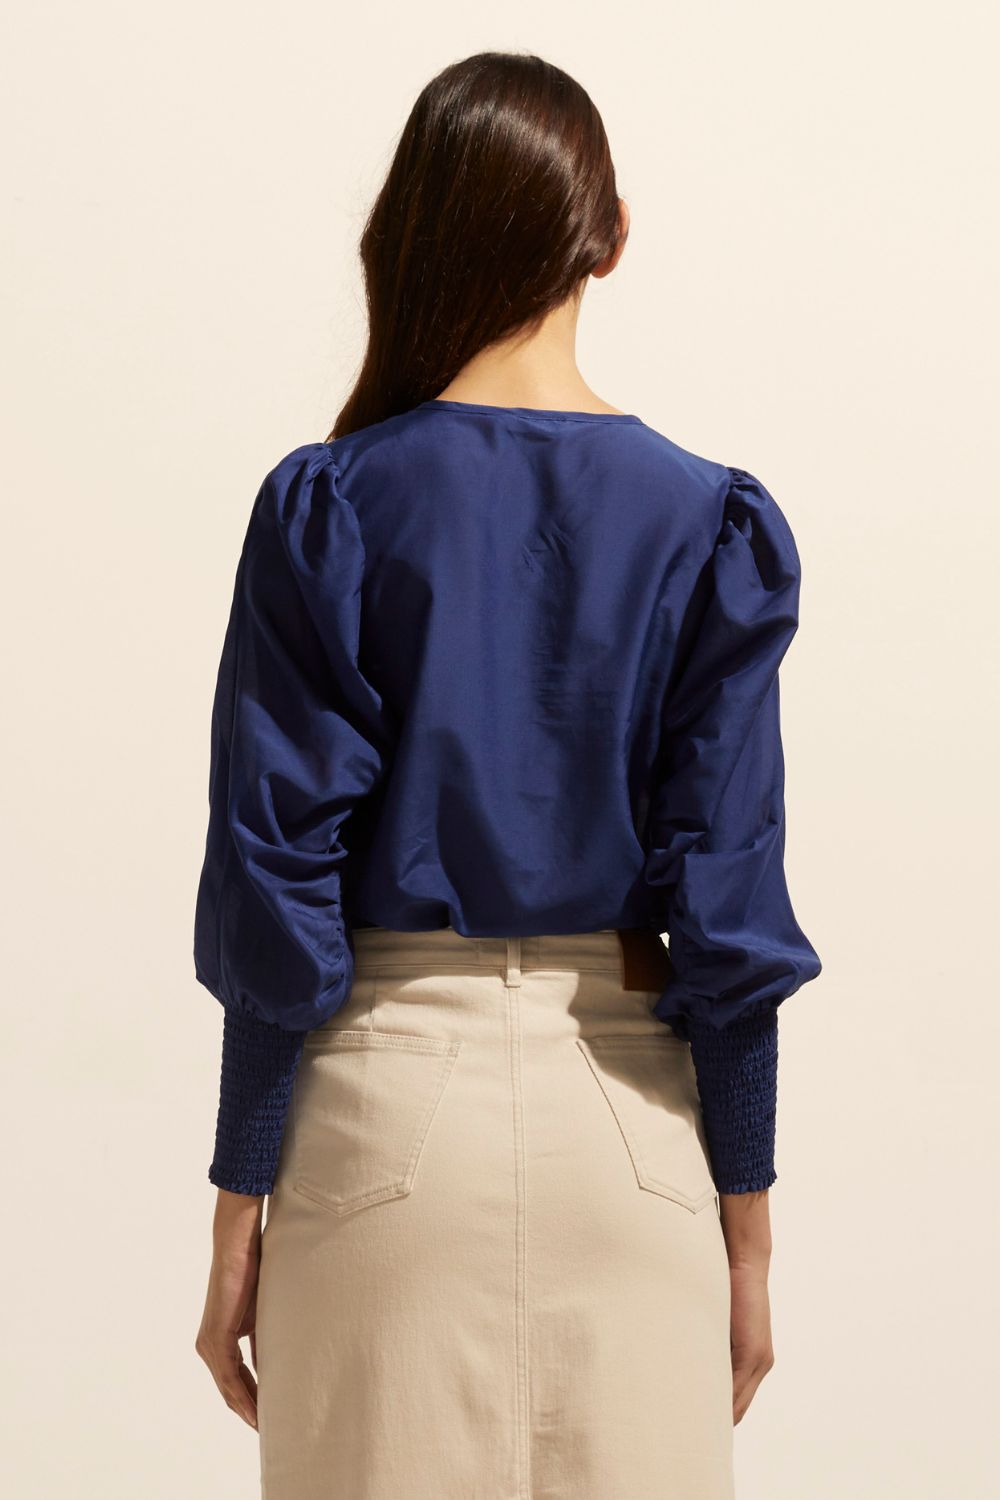 slate blue, blue, top, long sleeve, shirred cuffs, blouson sleeve, covered buttons round neckline, black image